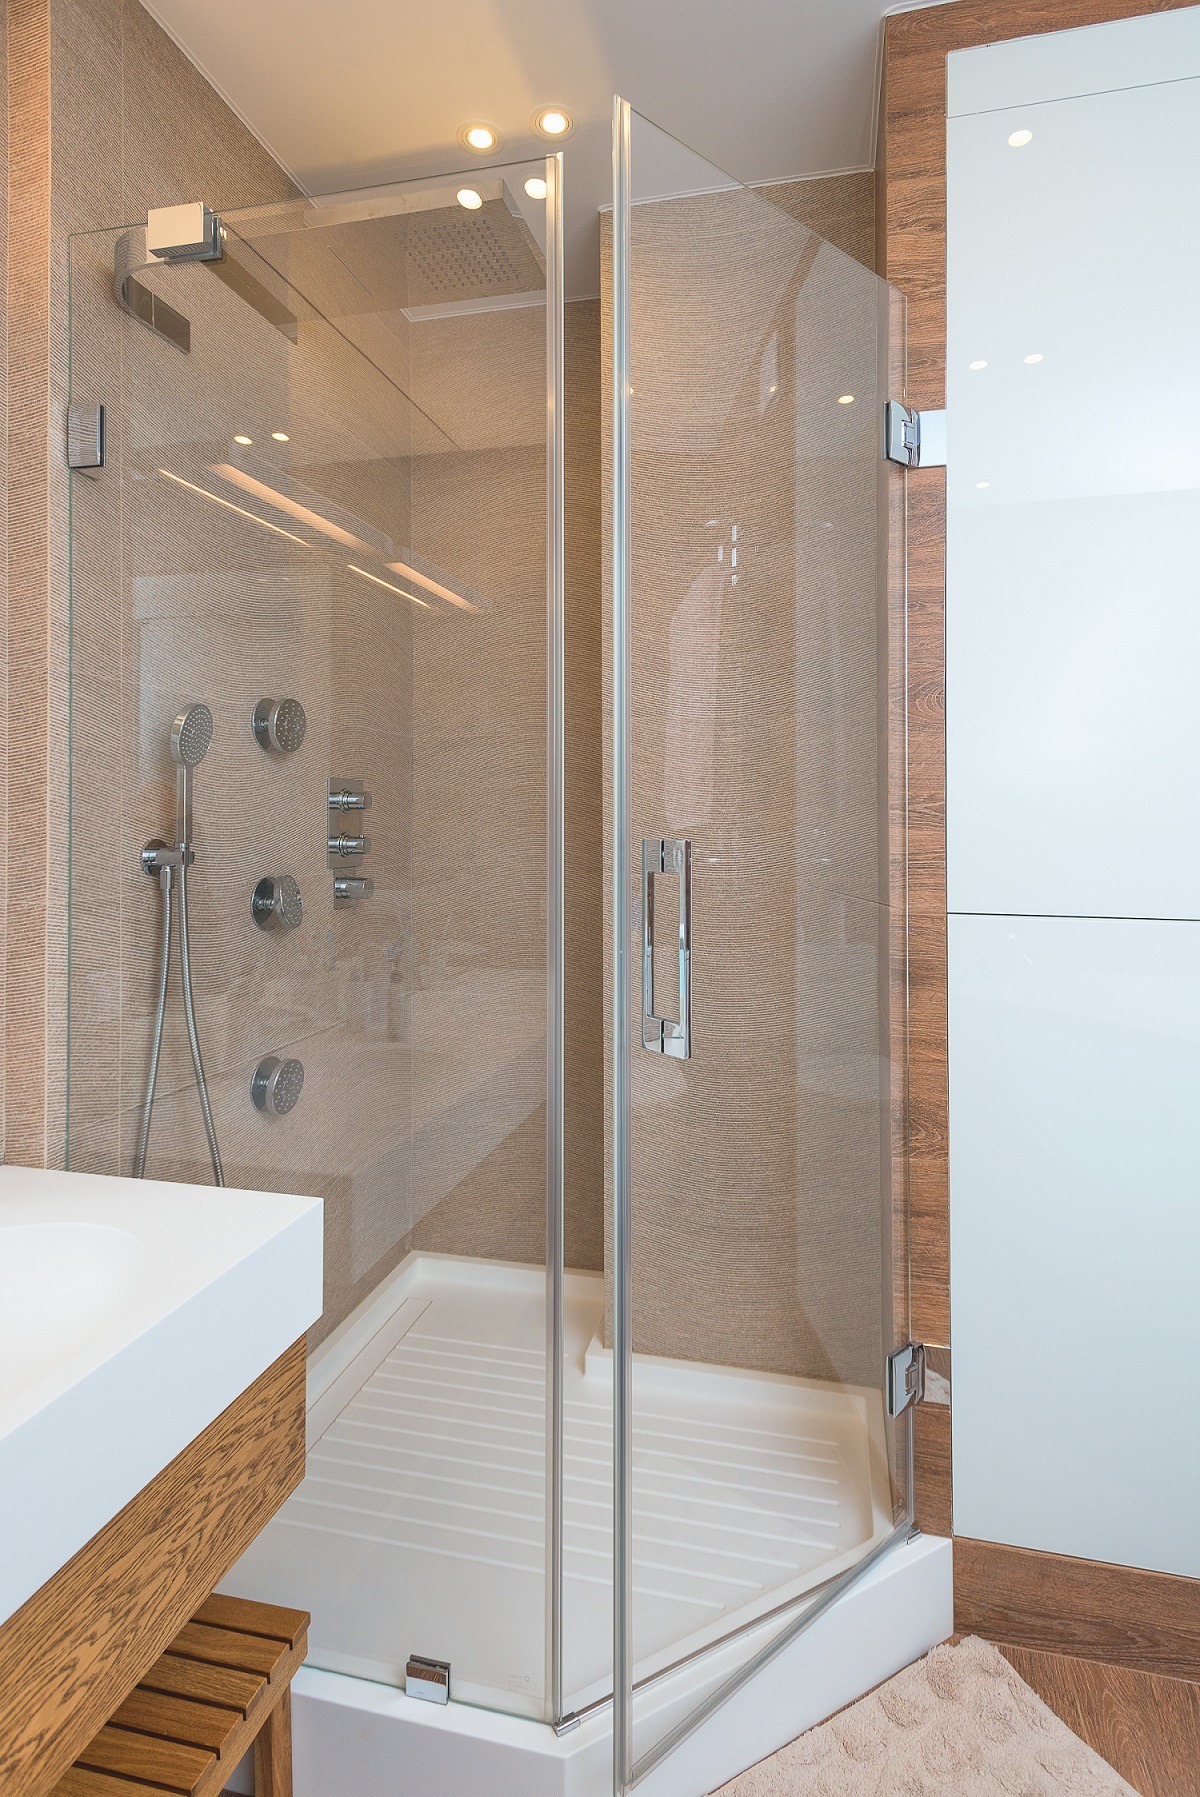 Shower in Apartment in Modern Style